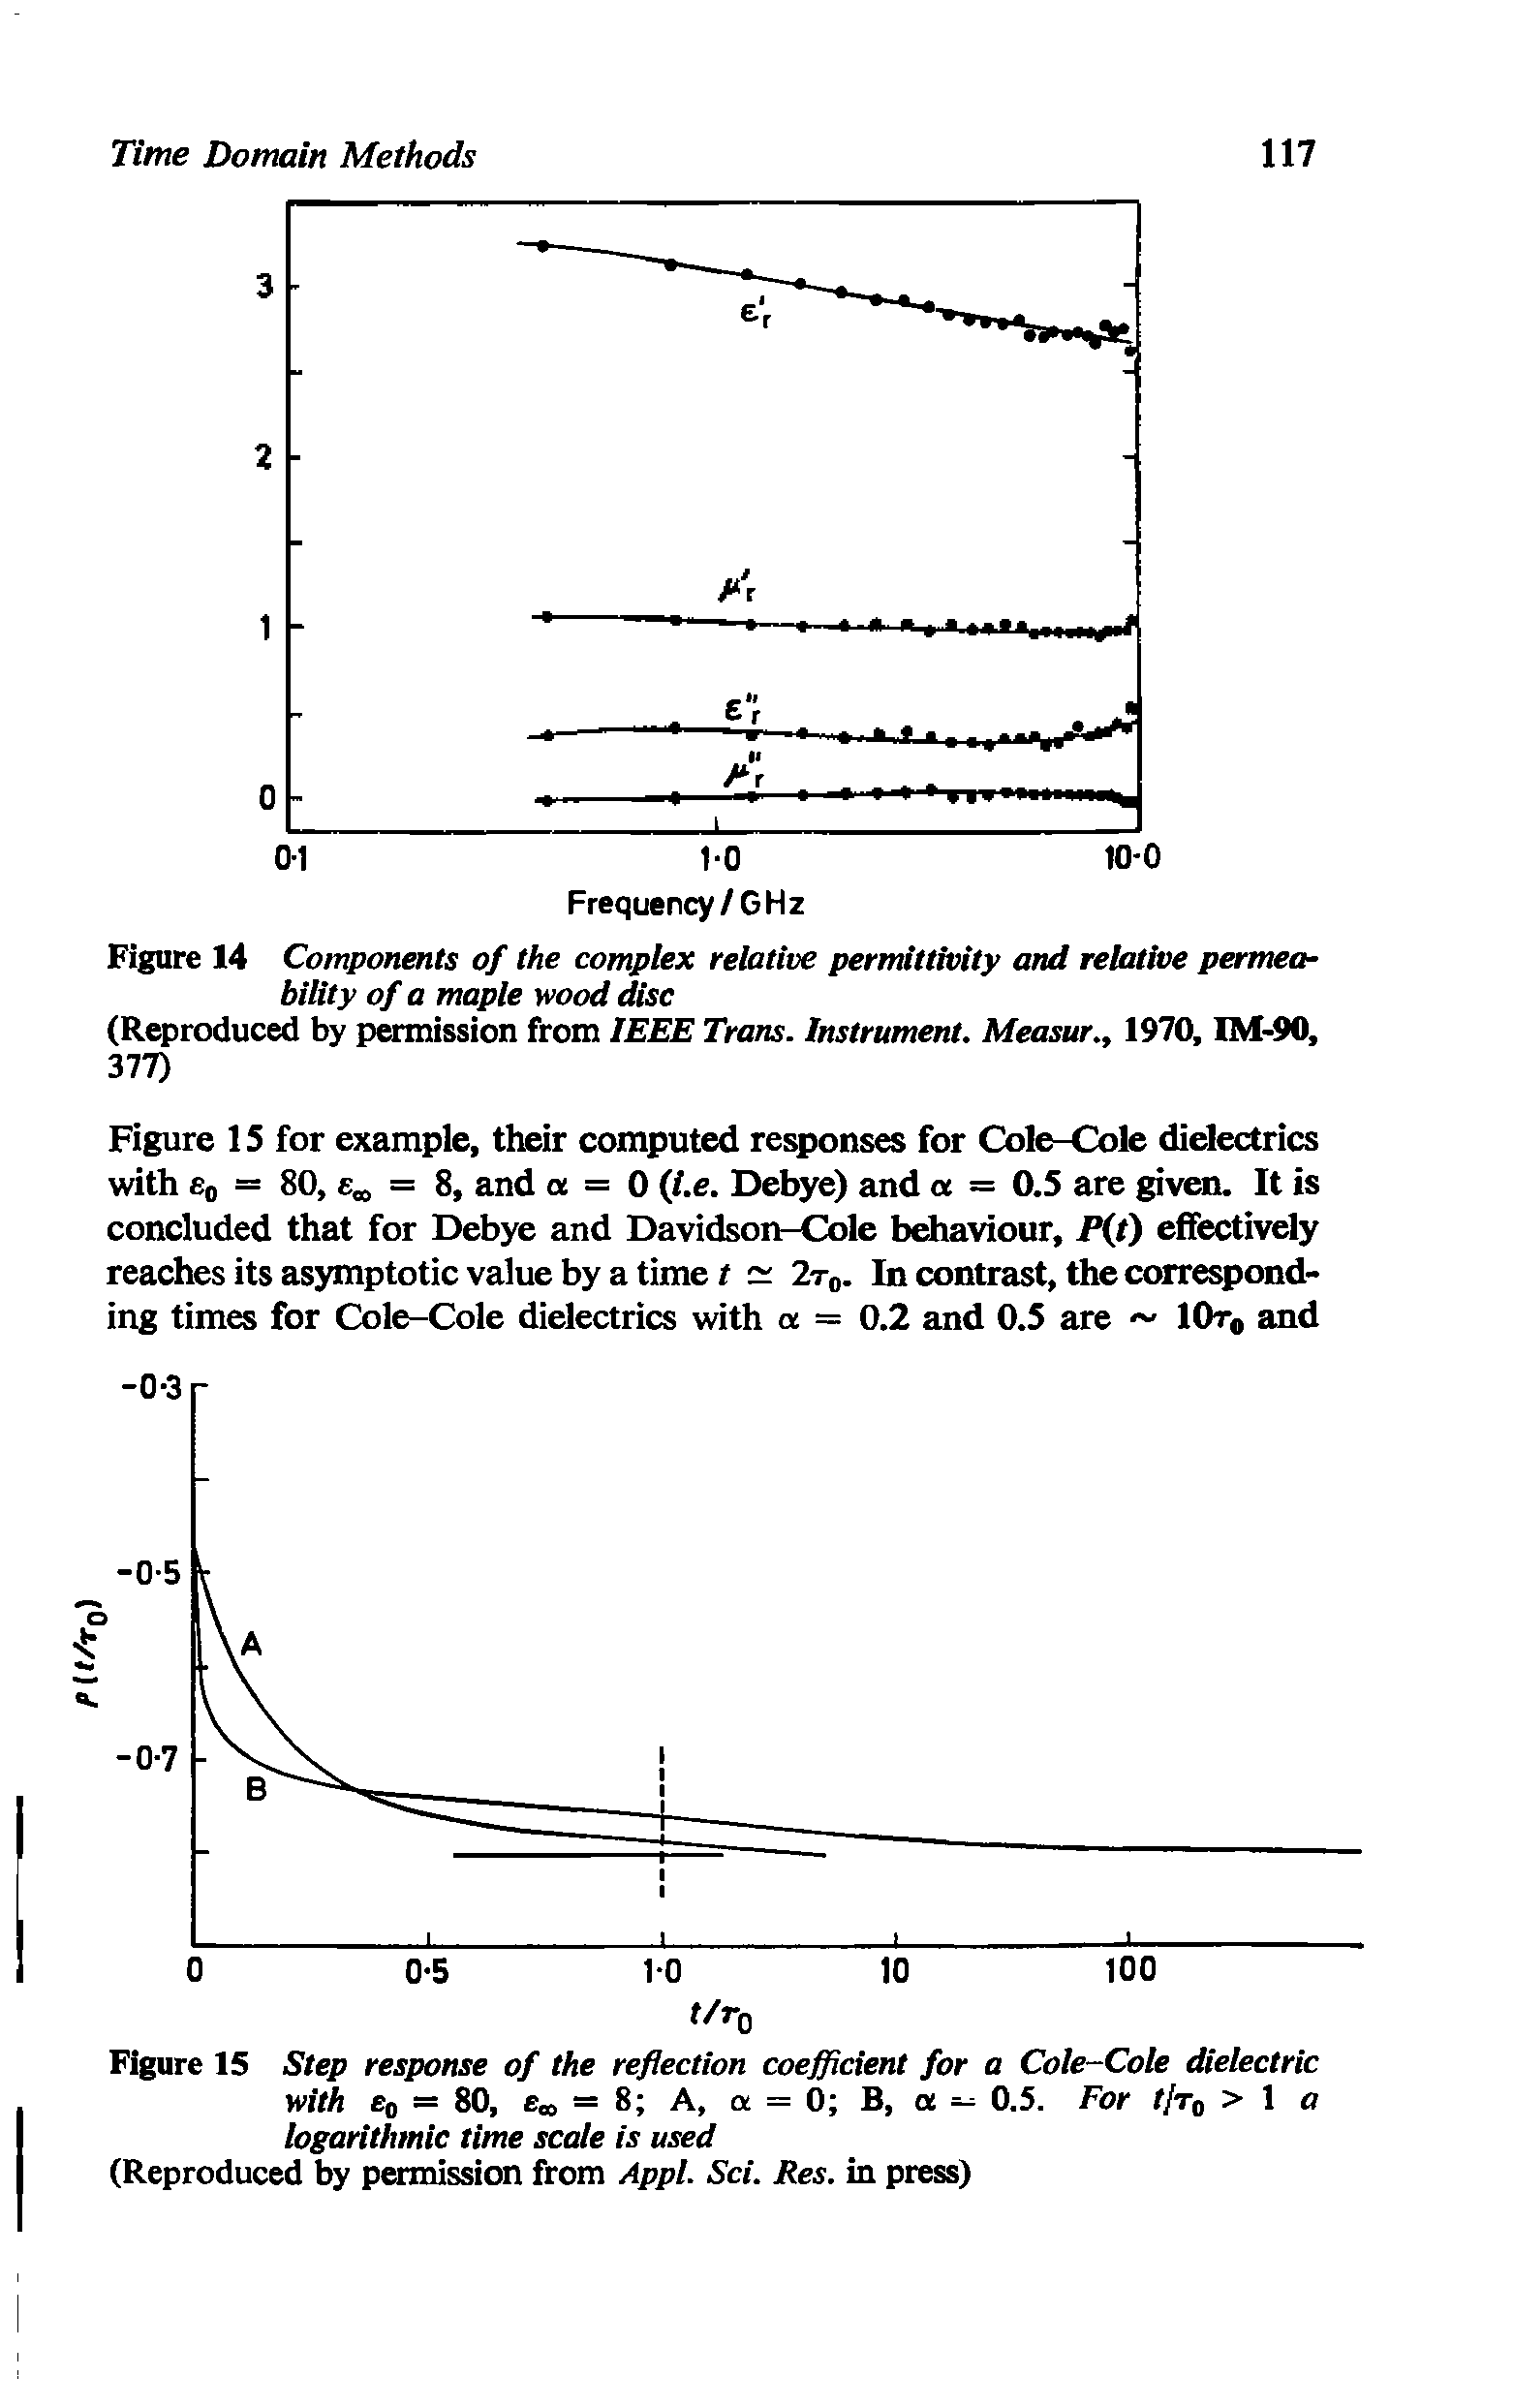 Figure 15 Step response of the reflection coefficient for a Cole-Cole dielectric with Bo = 80, Boo = 8 A, a = 0 B, a — 0.5. For //tq > 1 o logarithmic time scale is used (Reproduced by permission from Appl. Sci. Res. in press)...